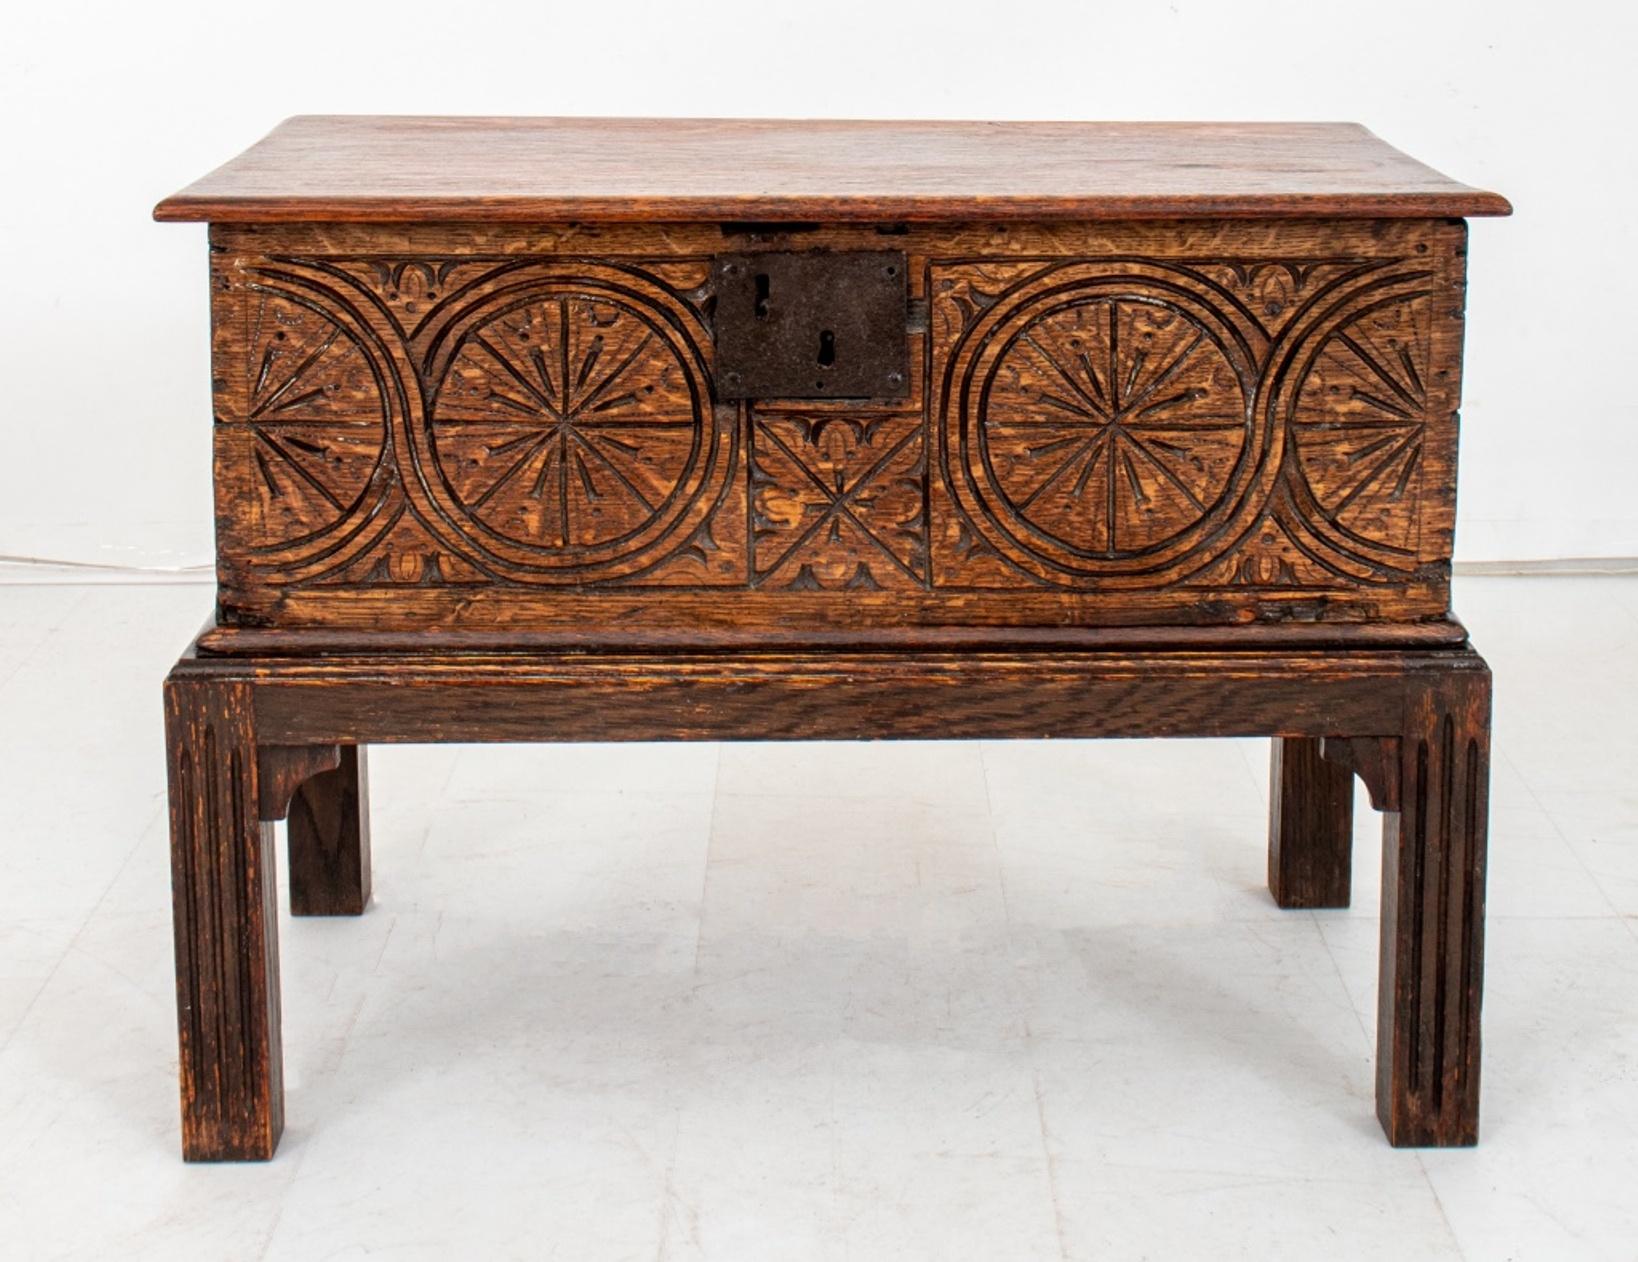 Aesthetic Movement hardwood side or end table with top opening to reveal storage compartment, the front hand-carved with a geometric design, upon four rectangular legs.

Dimensions: 19